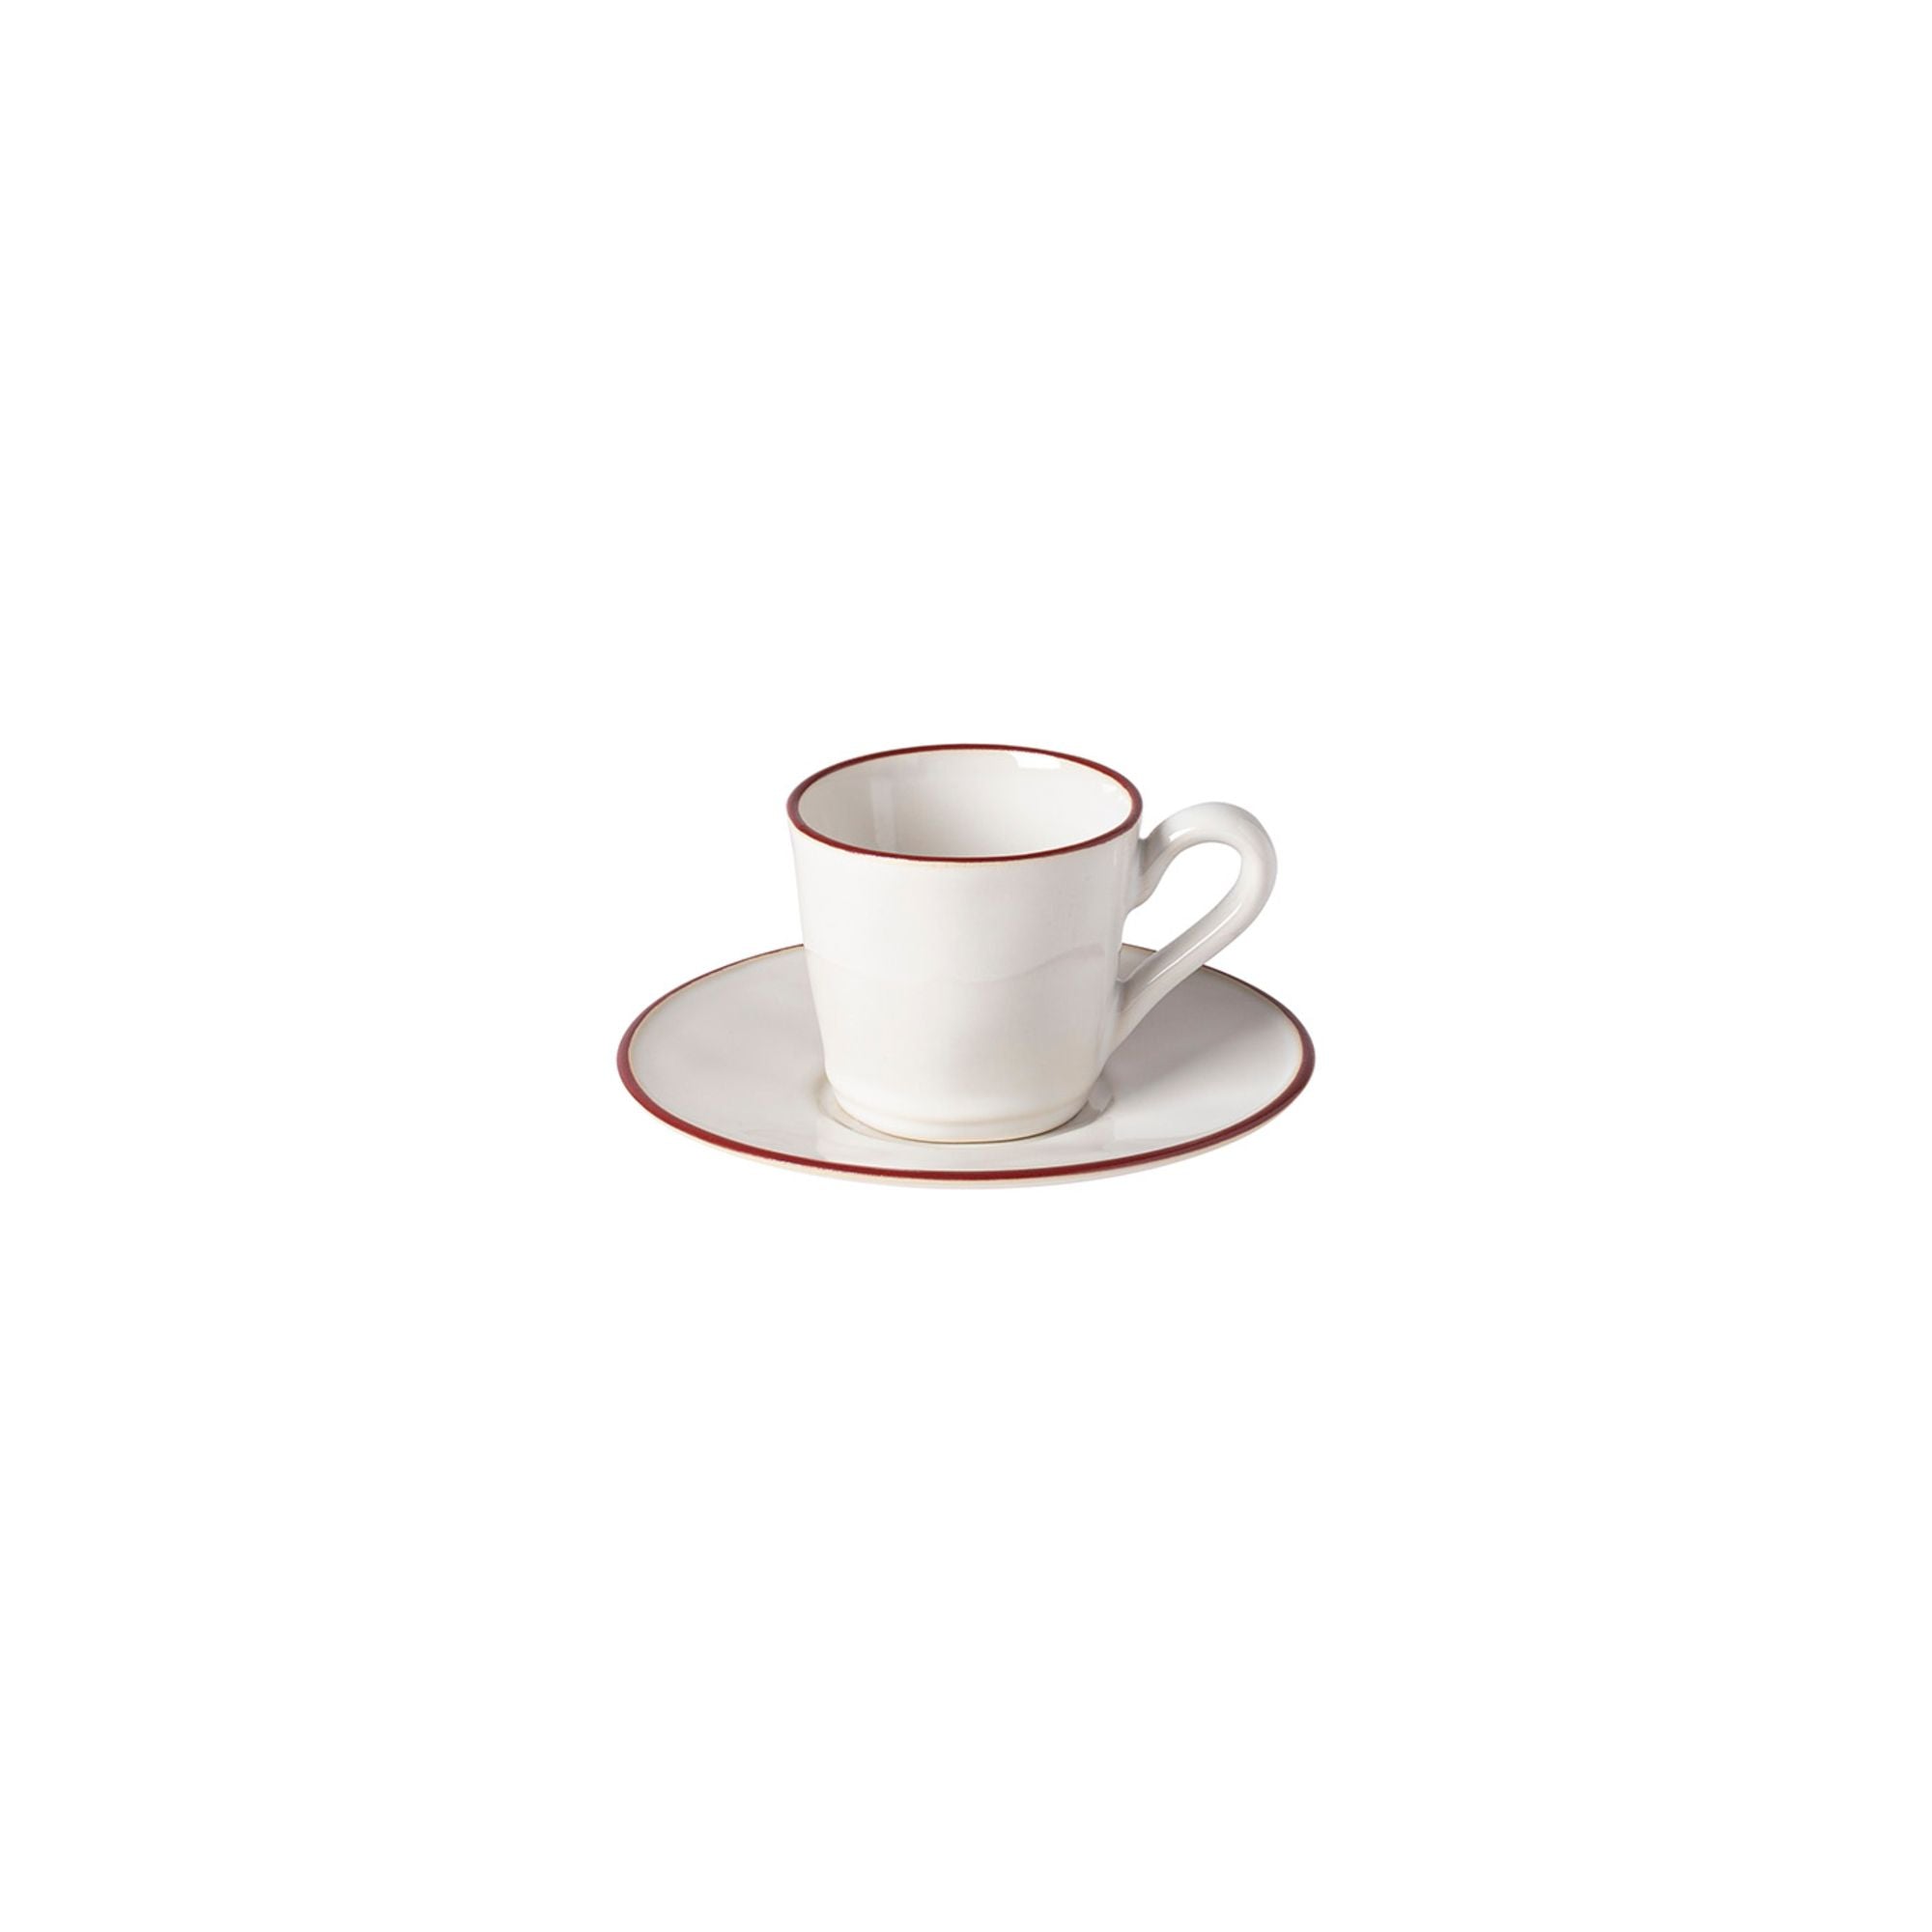 Beja Coffee Cup and Saucer 3 oz. White-Red